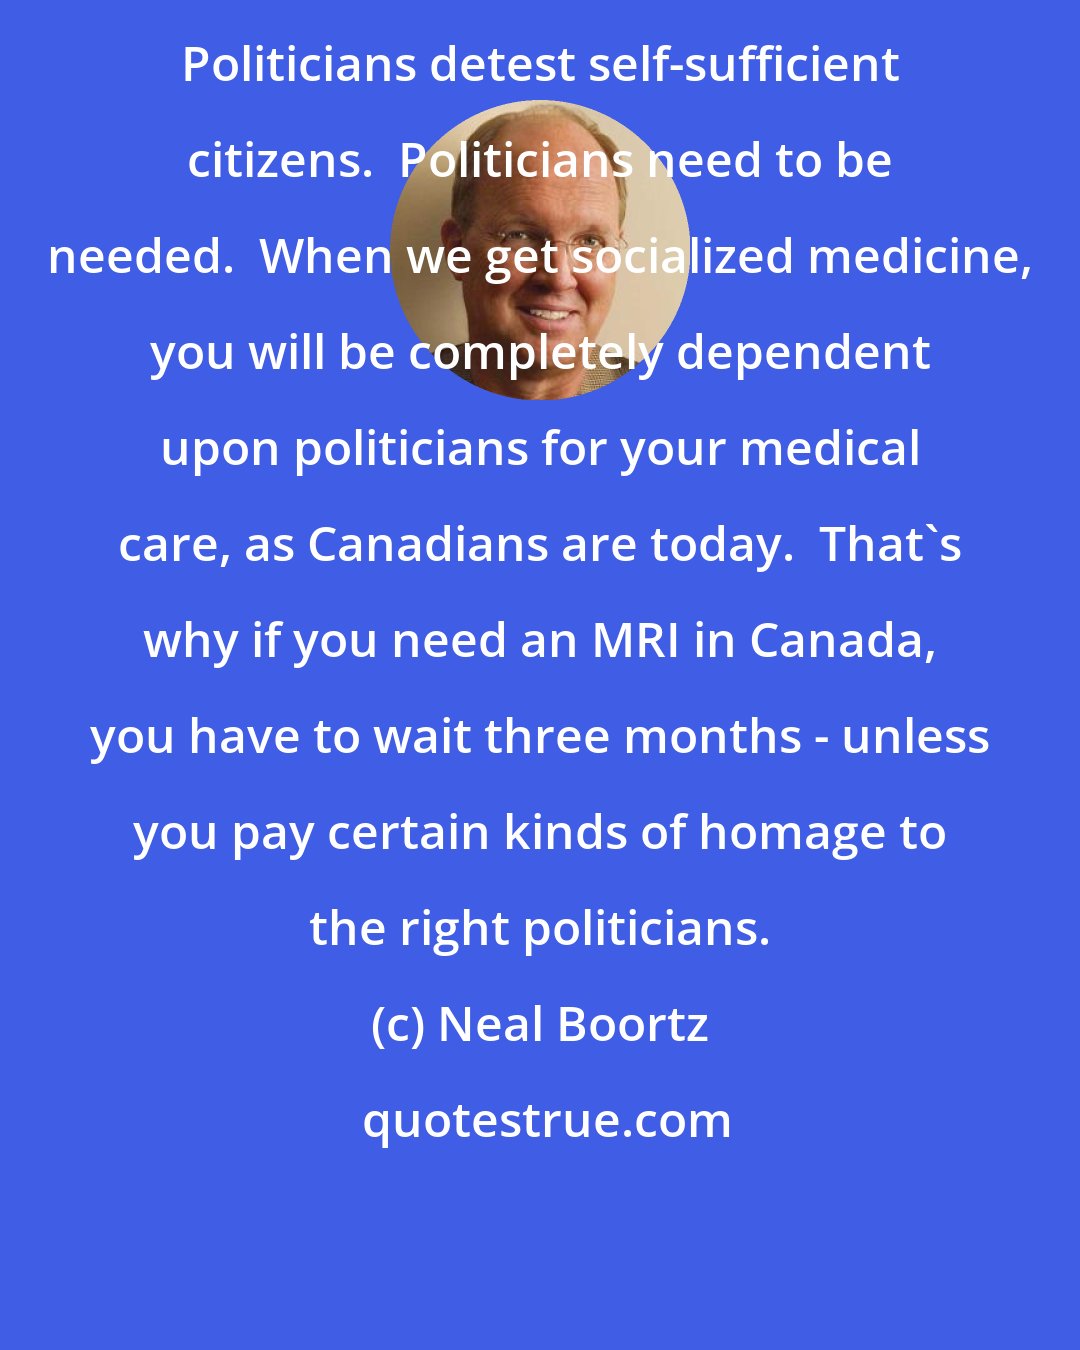 Neal Boortz: Politicians detest self-sufficient citizens.  Politicians need to be needed.  When we get socialized medicine, you will be completely dependent upon politicians for your medical care, as Canadians are today.  That's why if you need an MRI in Canada, you have to wait three months - unless you pay certain kinds of homage to the right politicians.